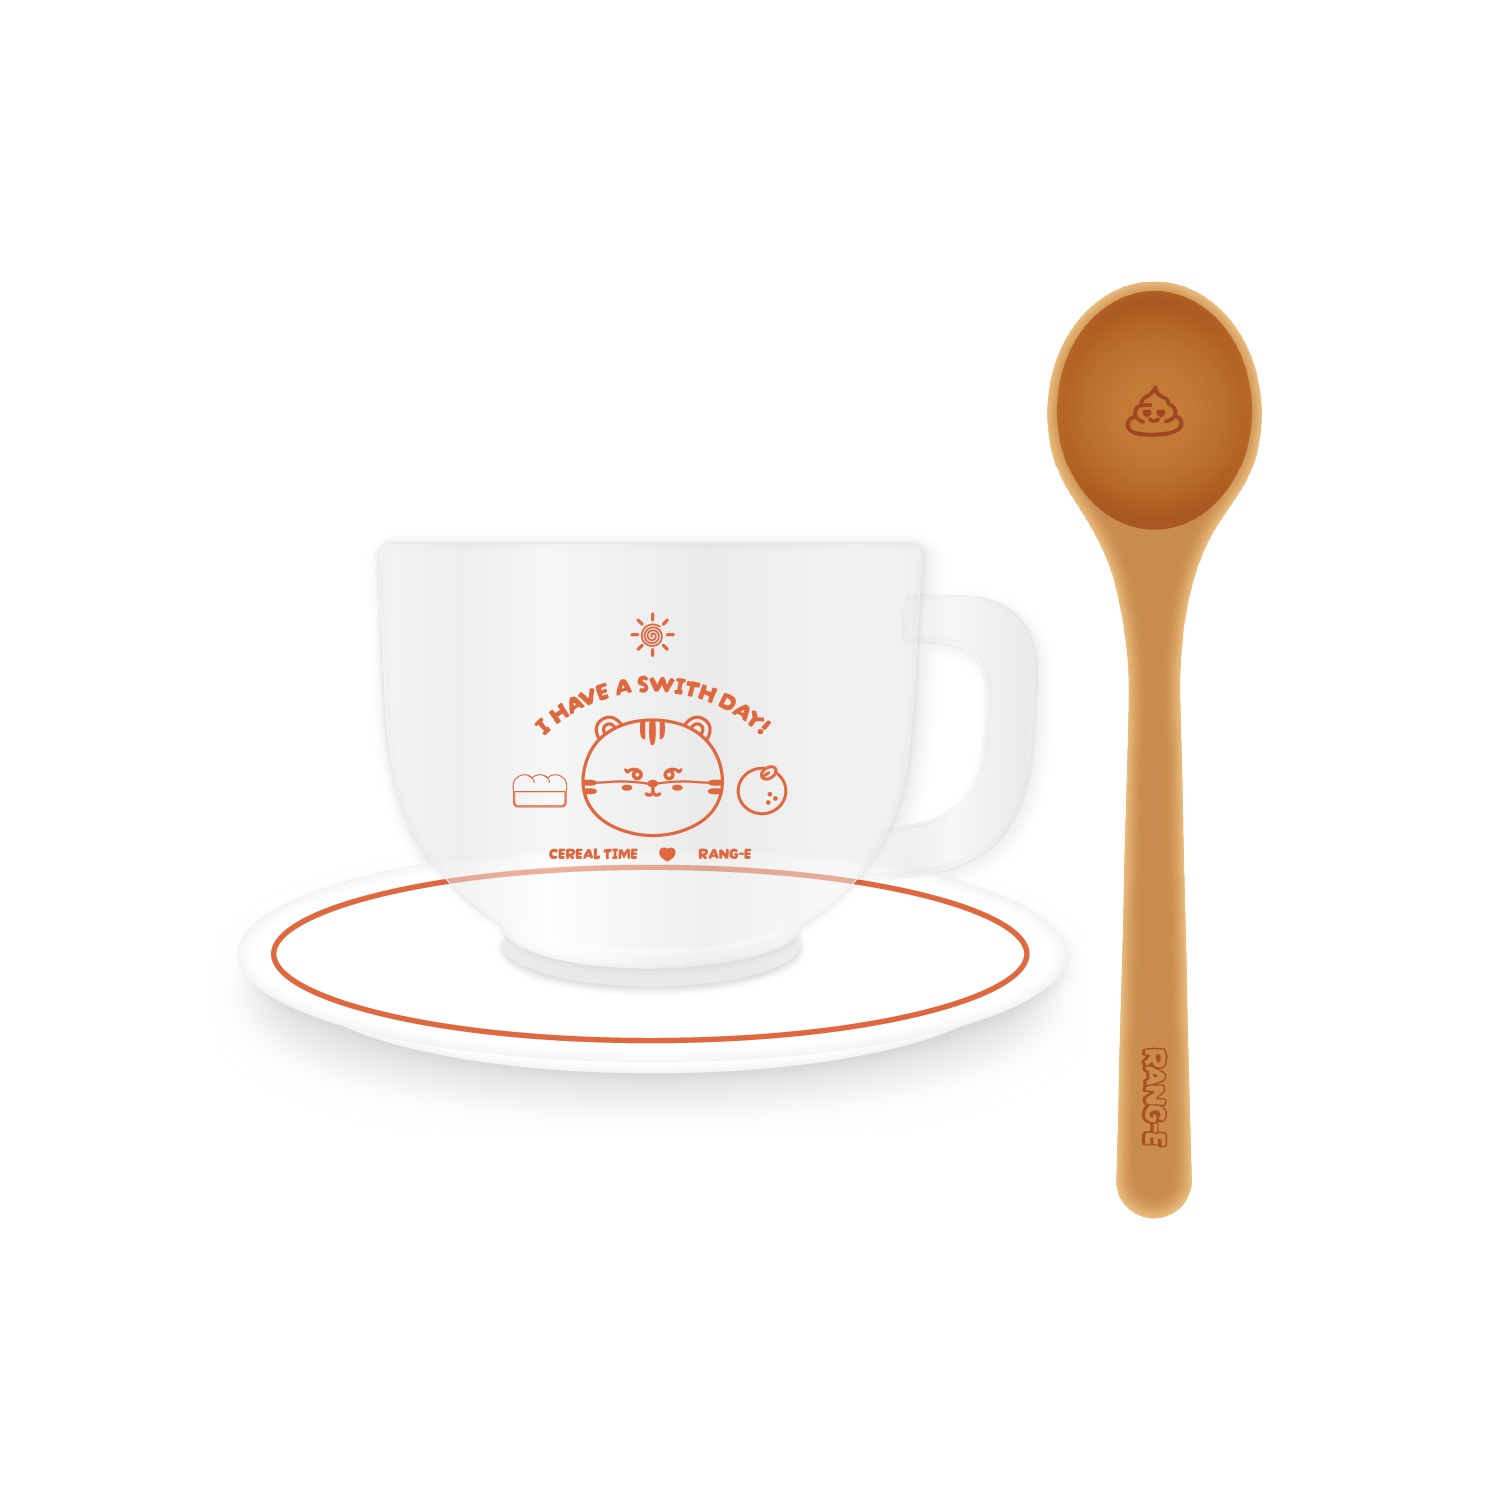 [STAYC WITHC! HAPPY YOON DAY! POP-UP STORE] 랑이 시리얼컵 세트 RANG-E CEREAL BOWL SET